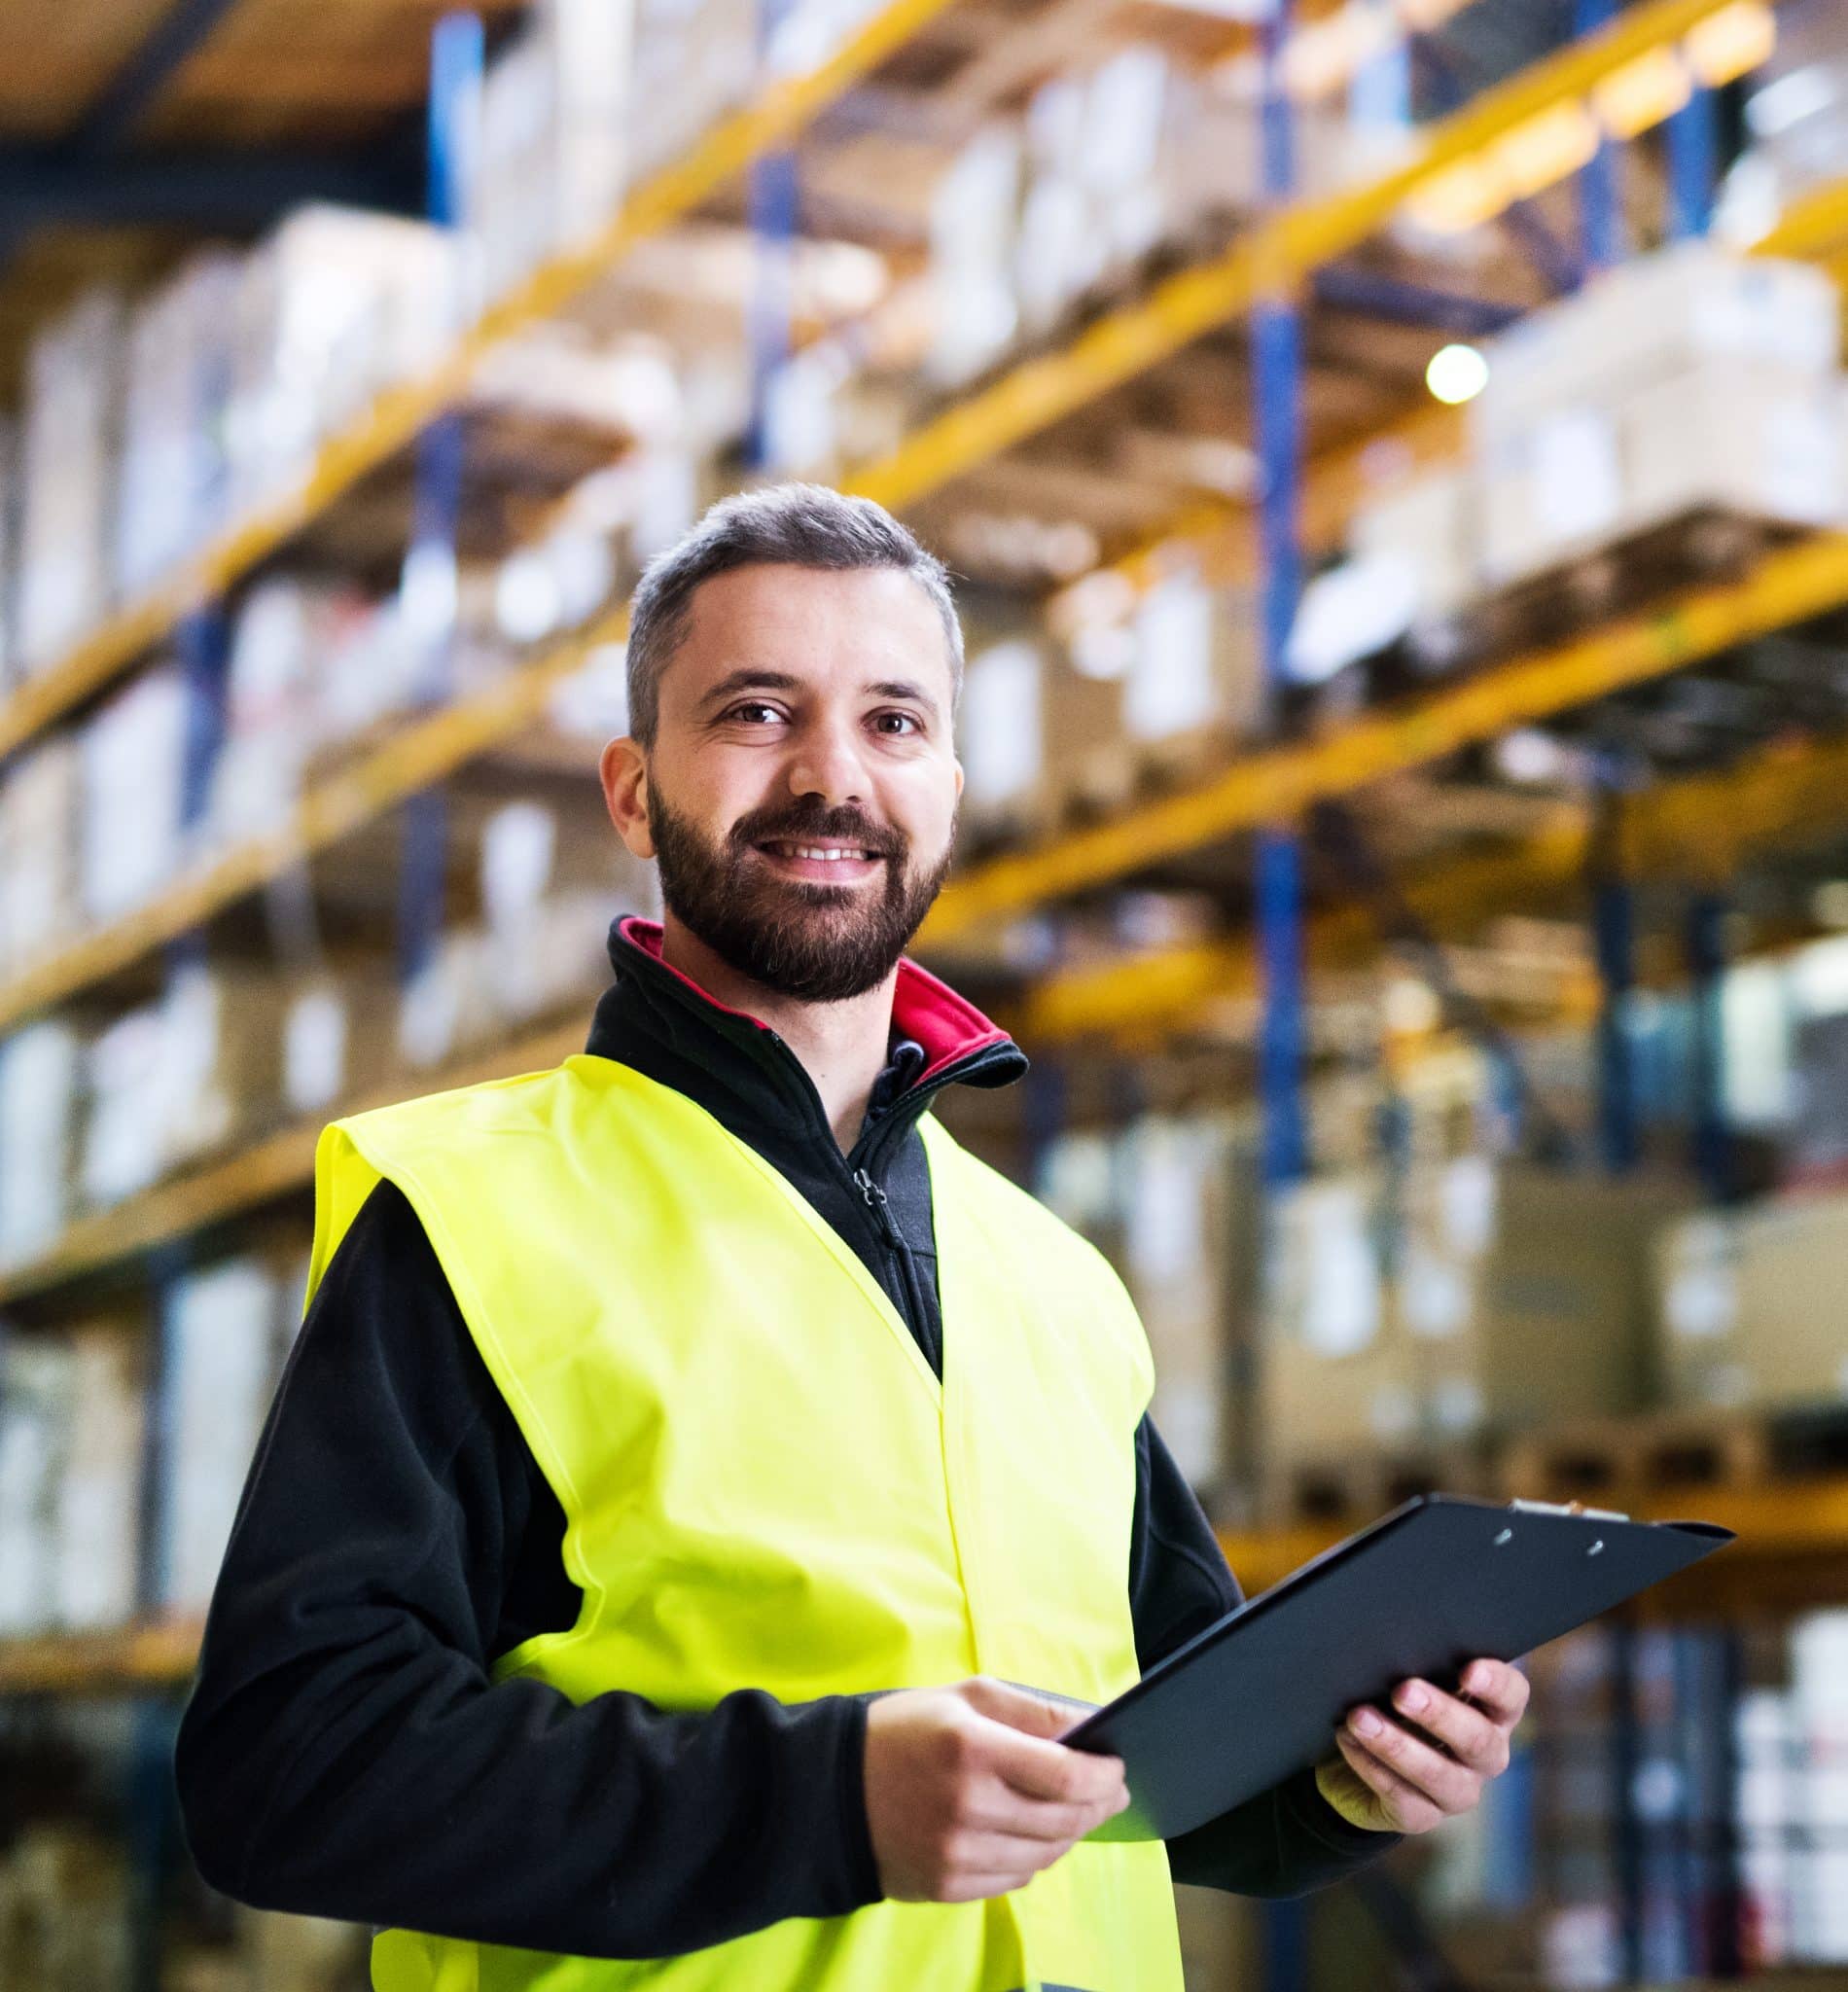 male-warehouse-worker-with-clipboard